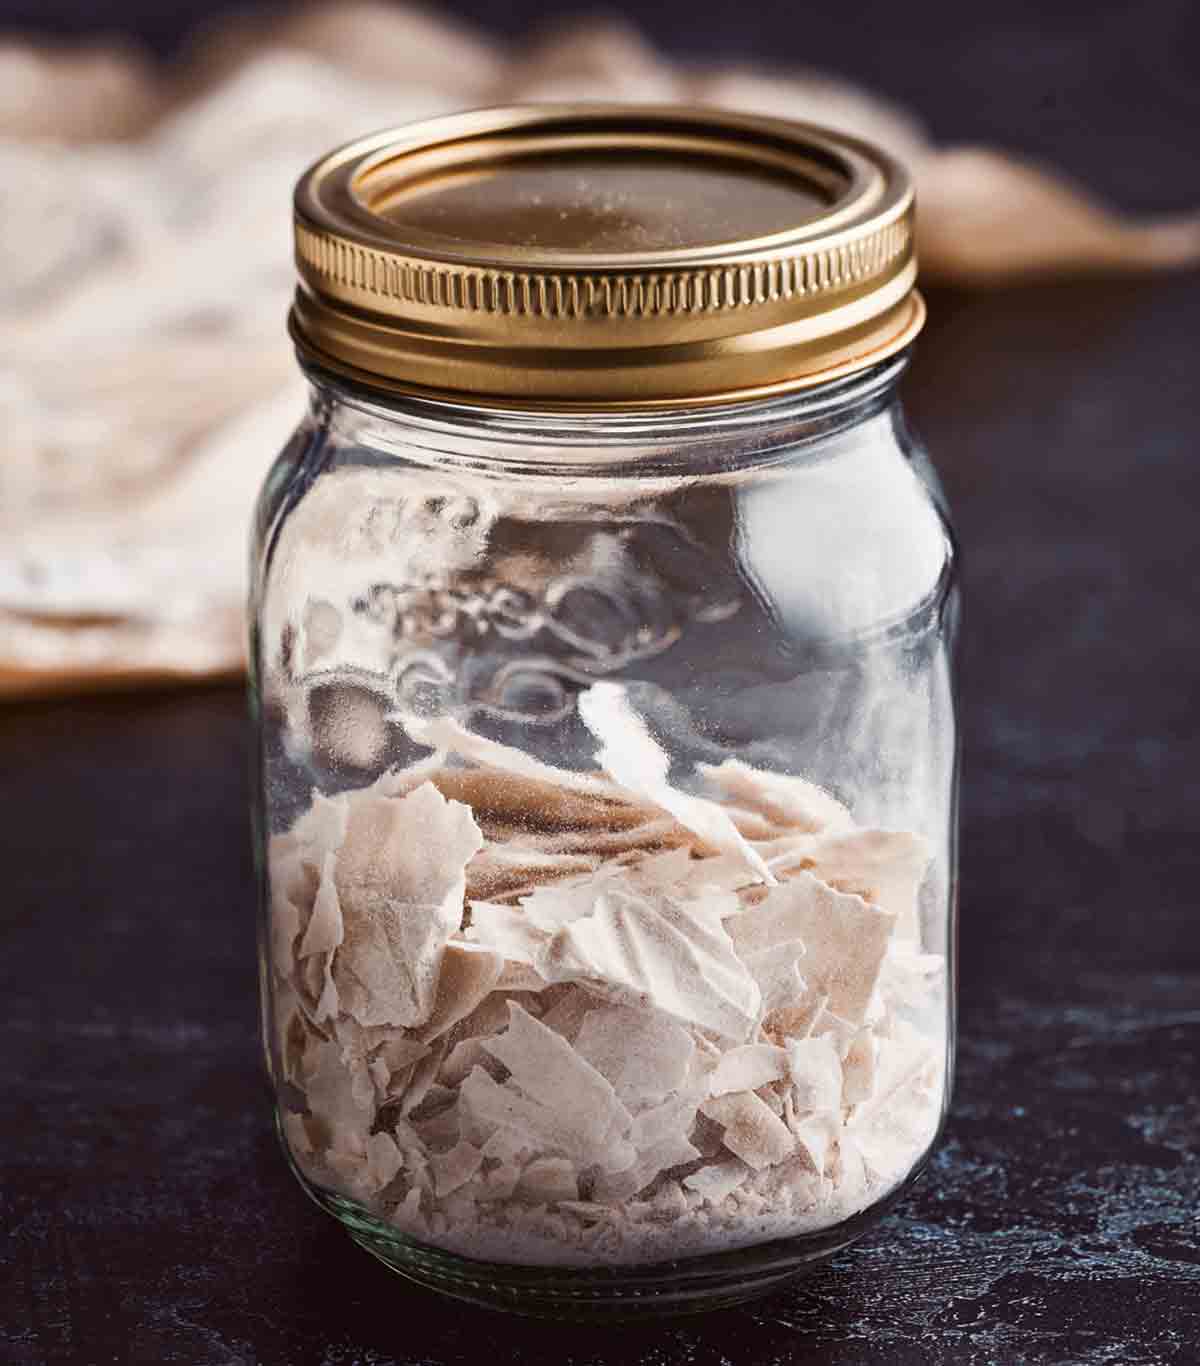 A jar of flaked dehydrated sourdough starter